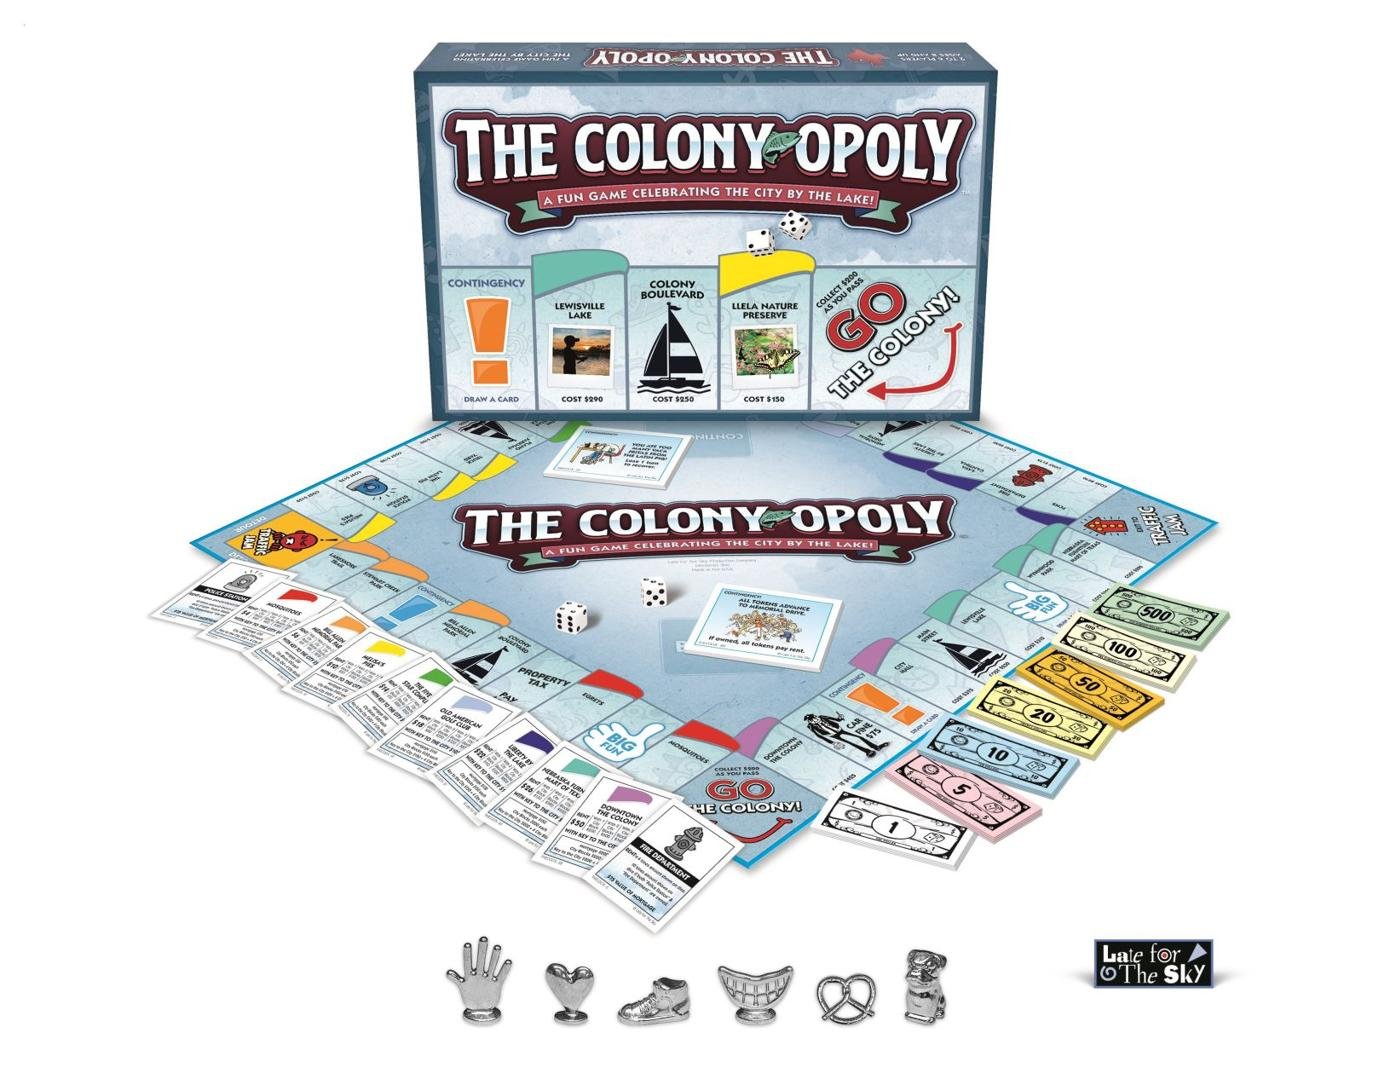 Board game features popular The Colony sites News